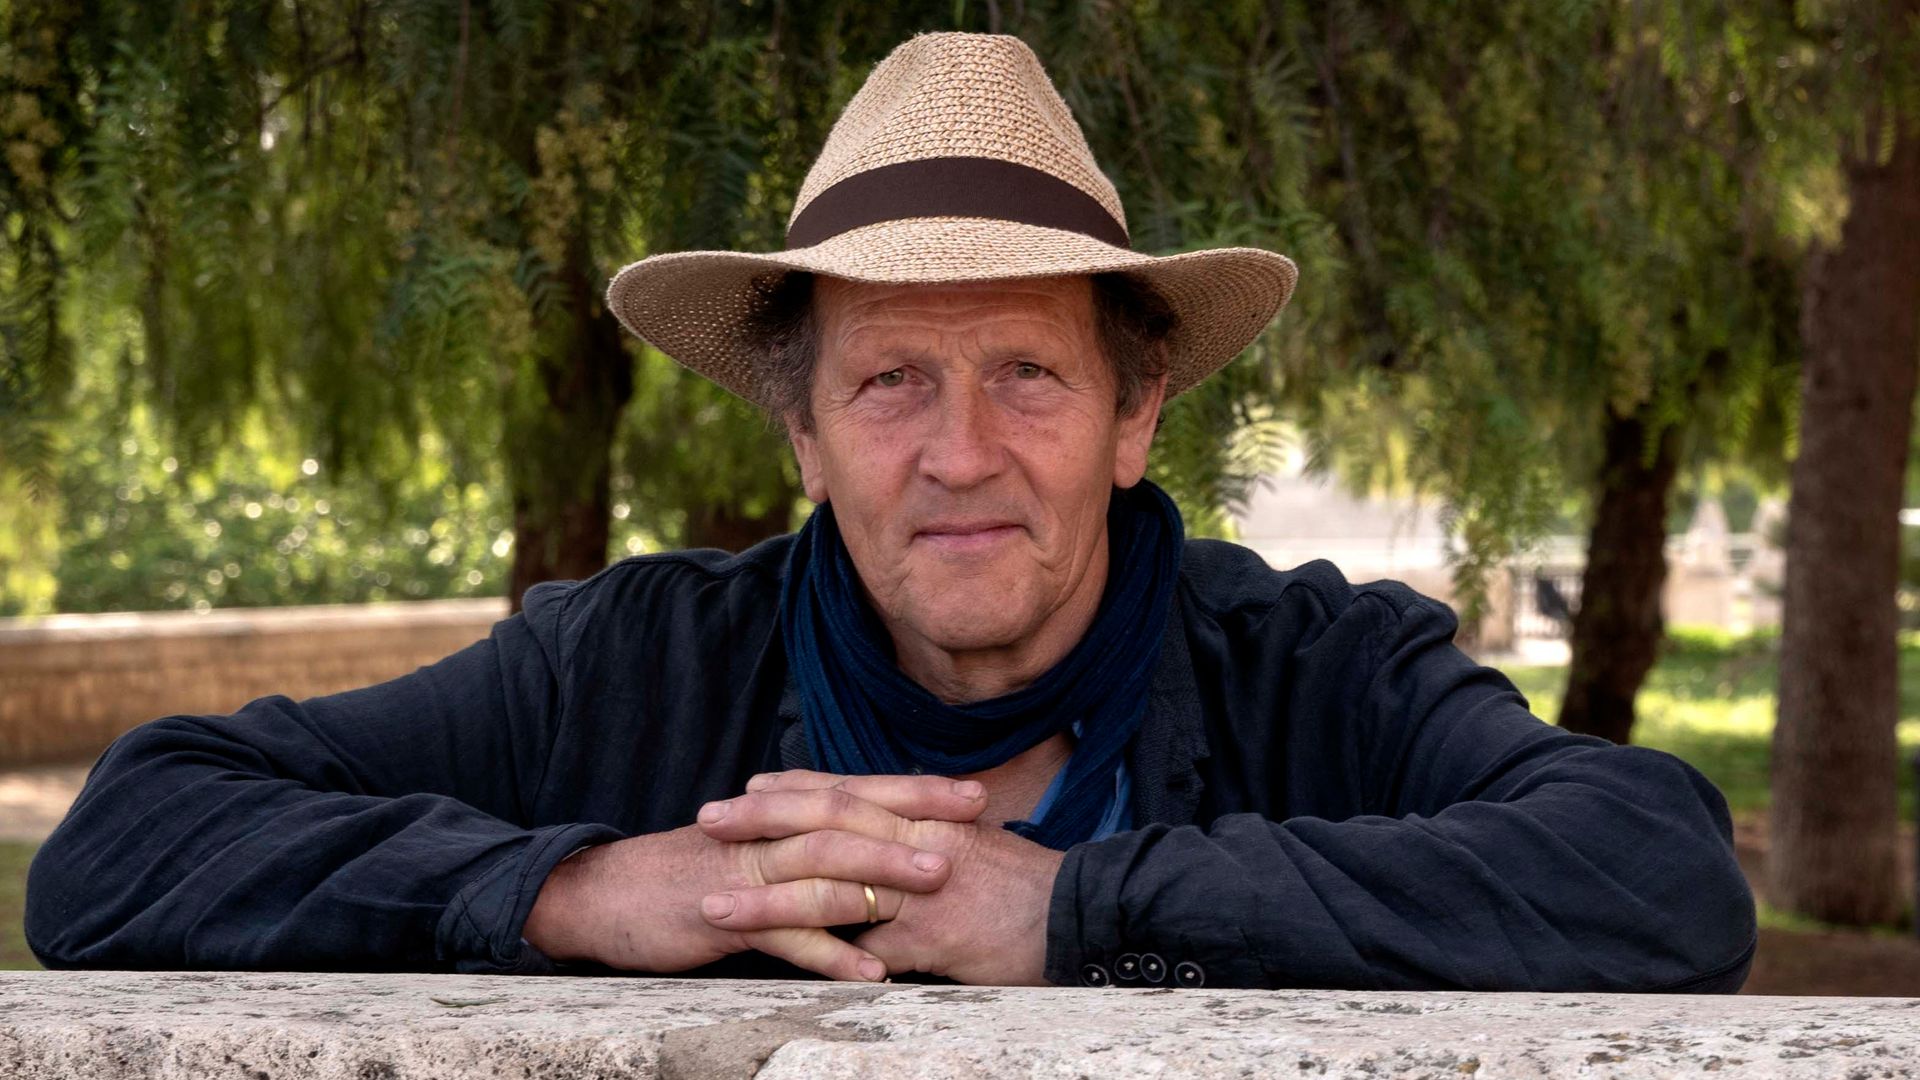 Monty Don addresses Gardeners' World future with fresh comment on departure